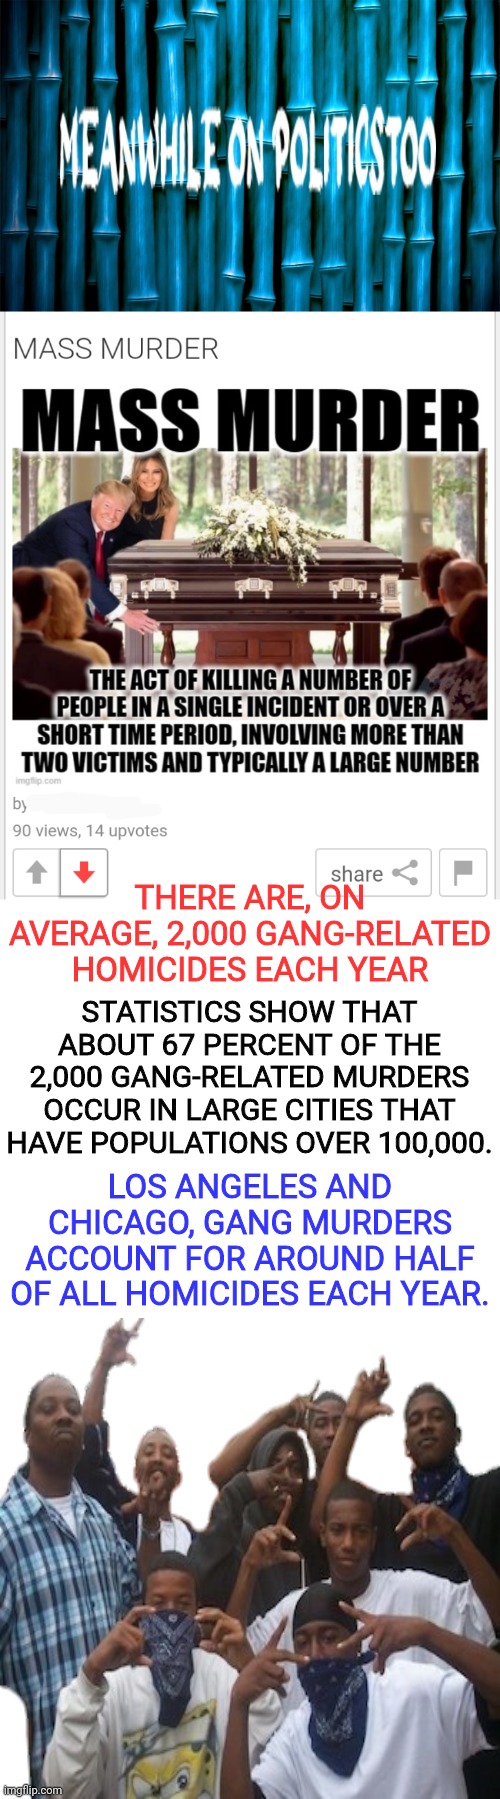 black gangs are the biggest mass murderers with gang shootings don't let them tell ya different. | THERE ARE, ON AVERAGE, 2,000 GANG-RELATED HOMICIDES EACH YEAR; STATISTICS SHOW THAT ABOUT 67 PERCENT OF THE 2,000 GANG-RELATED MURDERS OCCUR IN LARGE CITIES THAT HAVE POPULATIONS OVER 100,000. LOS ANGELES AND CHICAGO, GANG MURDERS ACCOUNT FOR AROUND HALF OF ALL HOMICIDES EACH YEAR. | image tagged in meanwhile on politicstoo,black,black man,culture | made w/ Imgflip meme maker